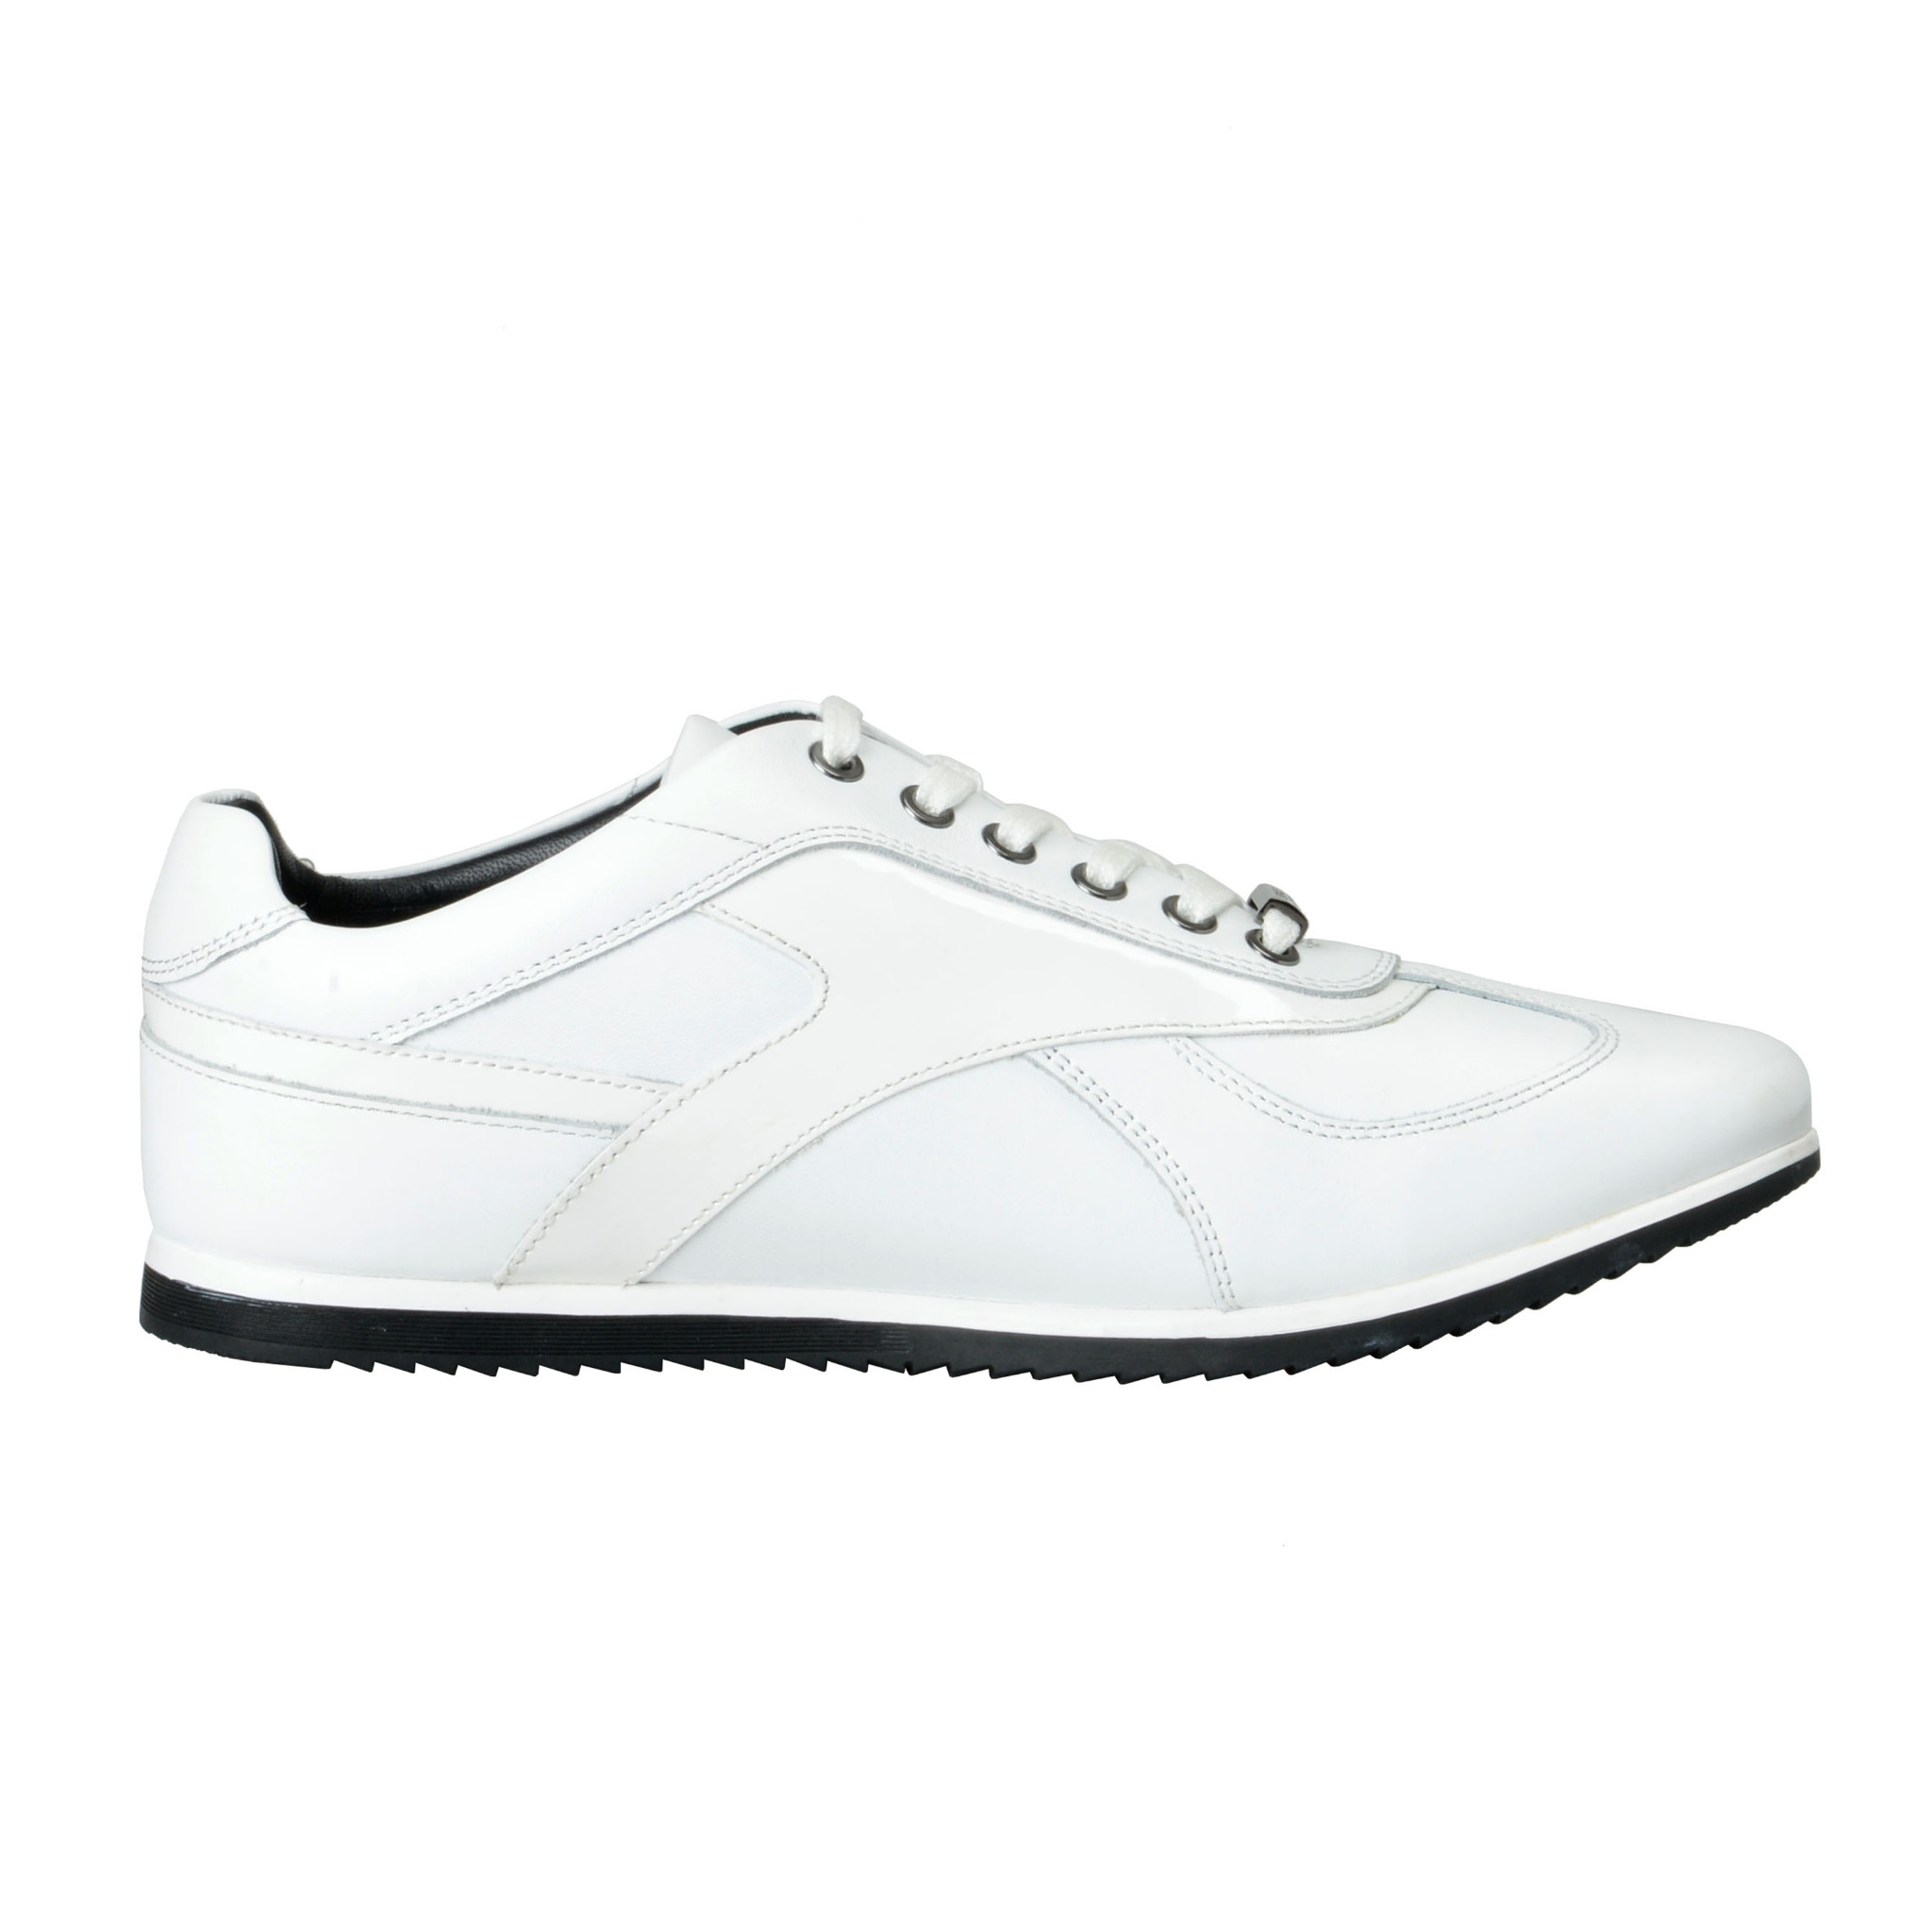 Versace Collection Men's White Leather Fashion Sneakers Shoes 6 7 8 9 ...